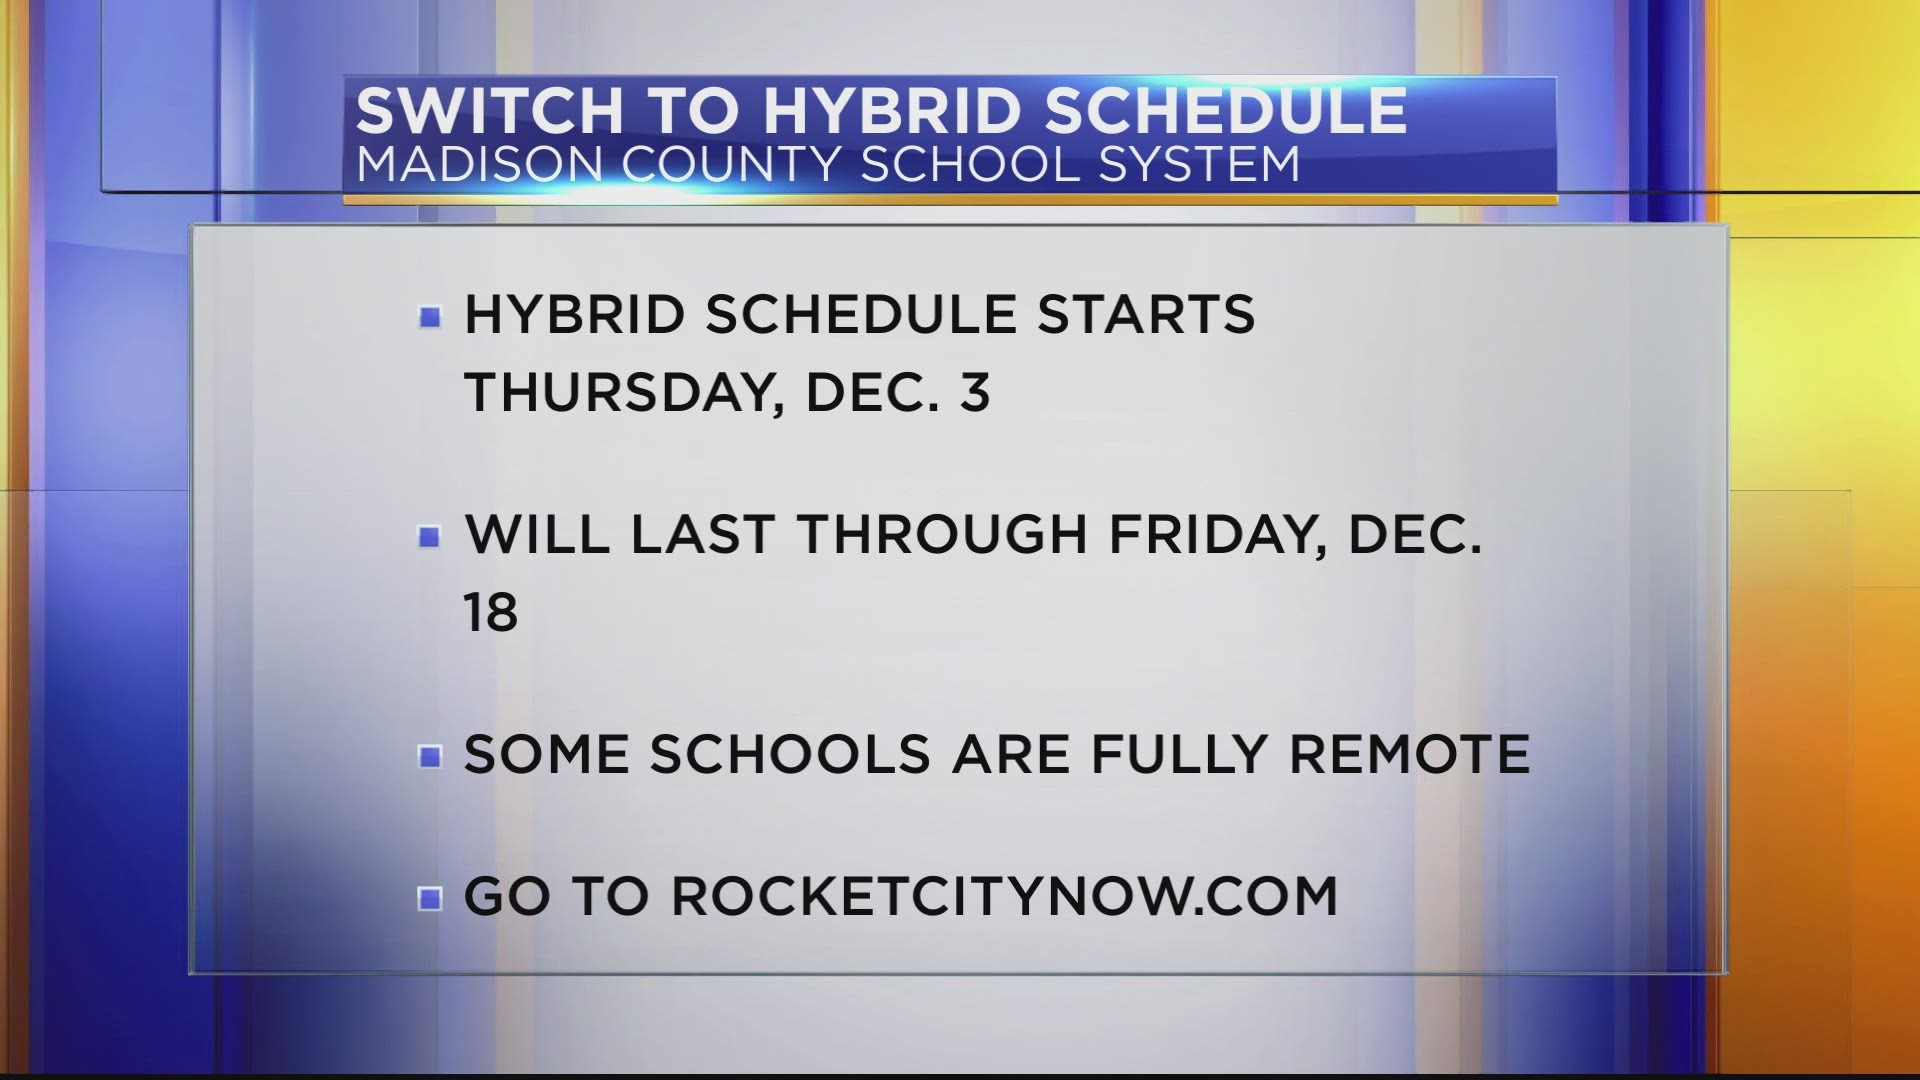 Madison County Schools announced on Monday, November 30, its schools will transition to level 2 hybrid instruction starting on December 3 through December 18.